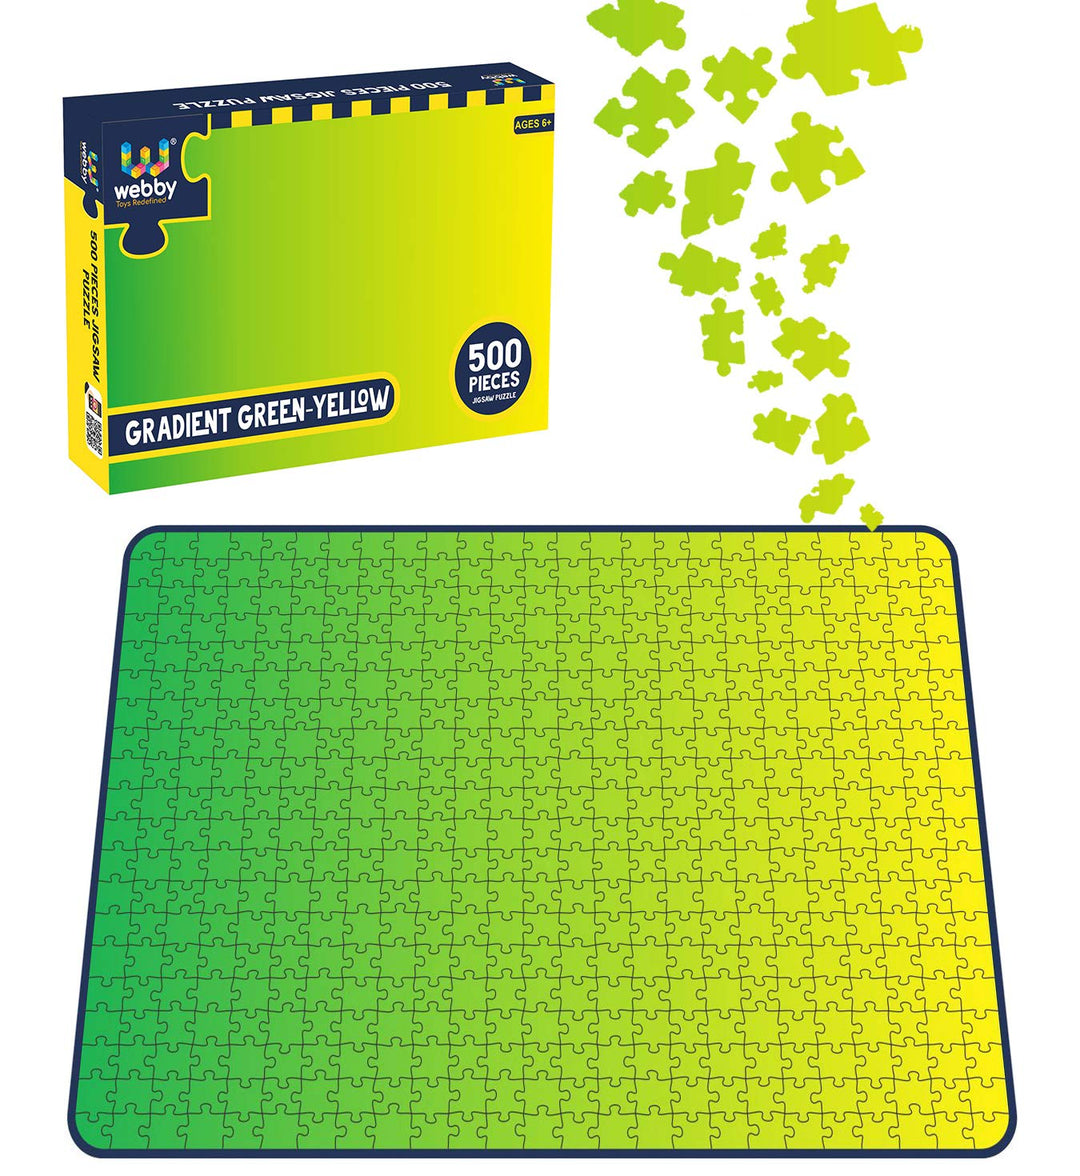 Webby Gradient Green-Yellow Wooden Jigsaw Puzzle, 500 pieces